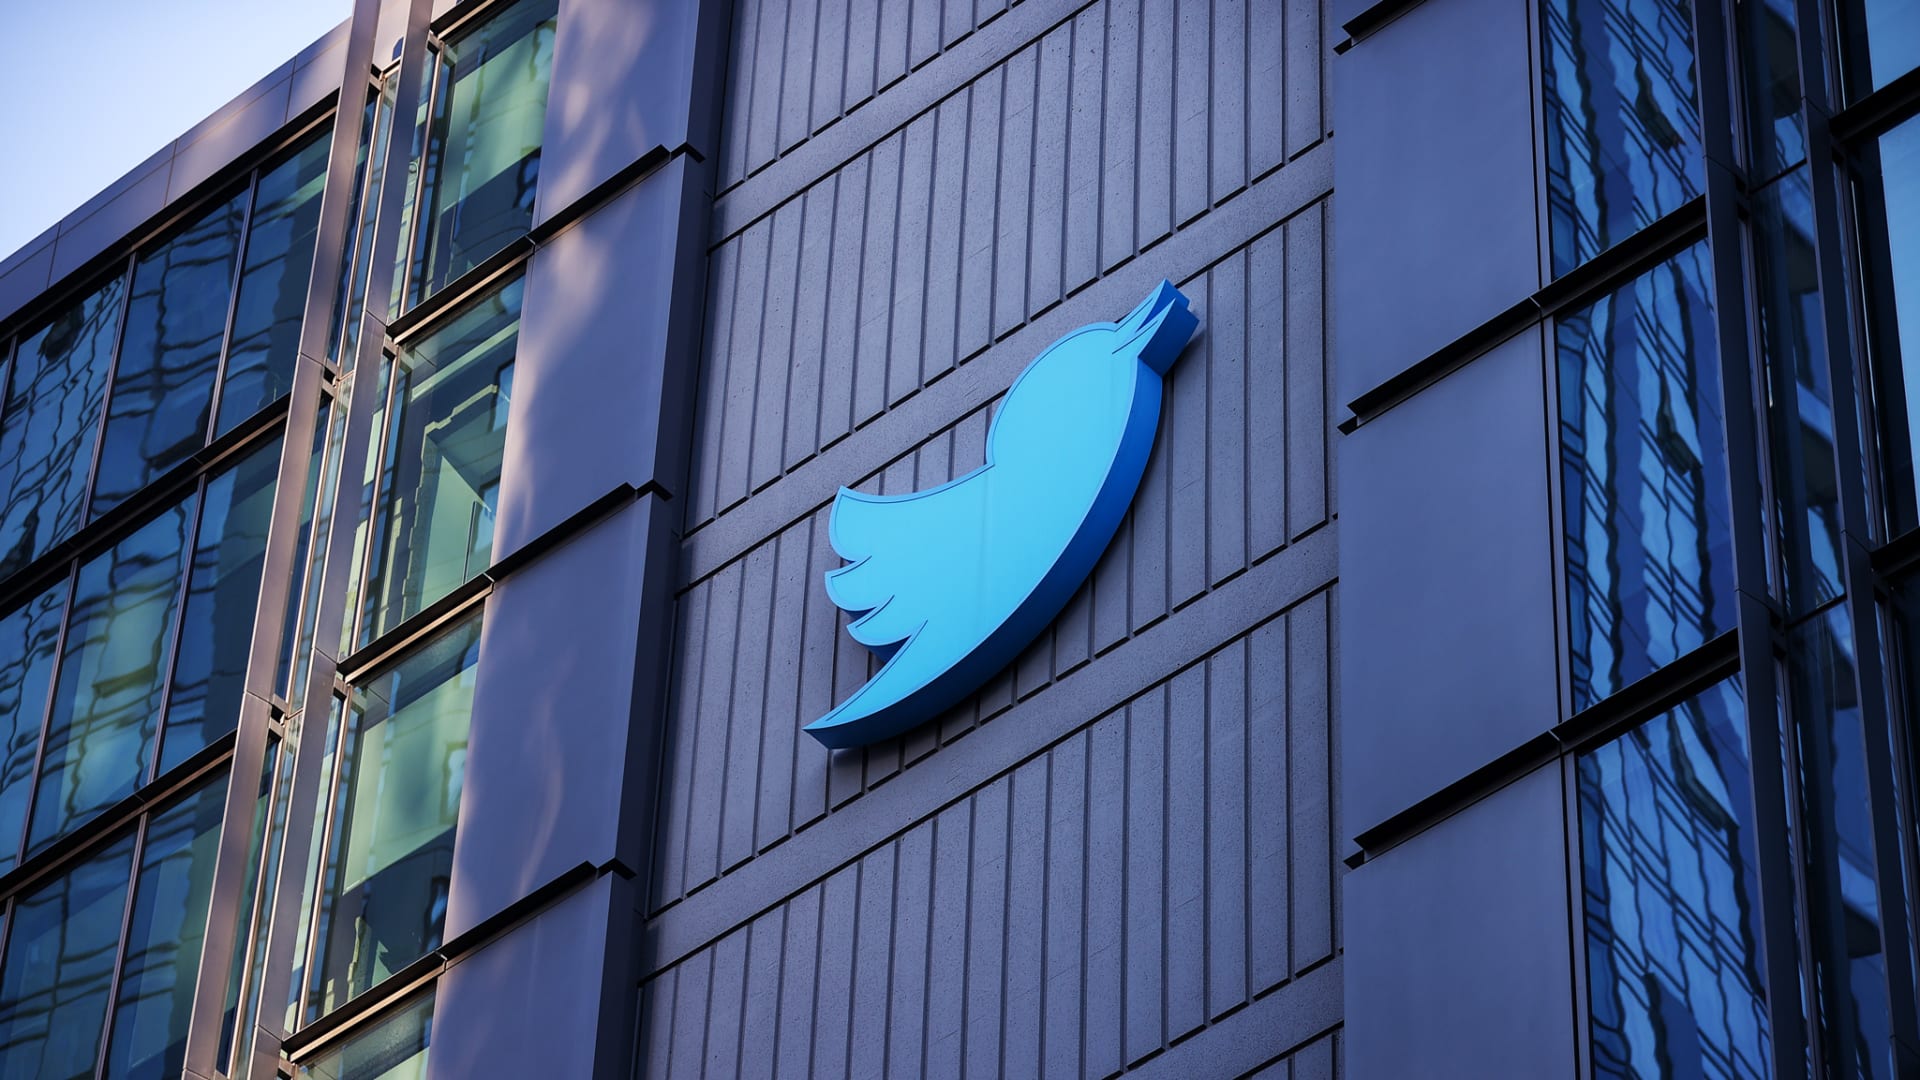 Just 1 Day After Jack Dorsey Stepped Down, Twitter Announced a Controversial Change